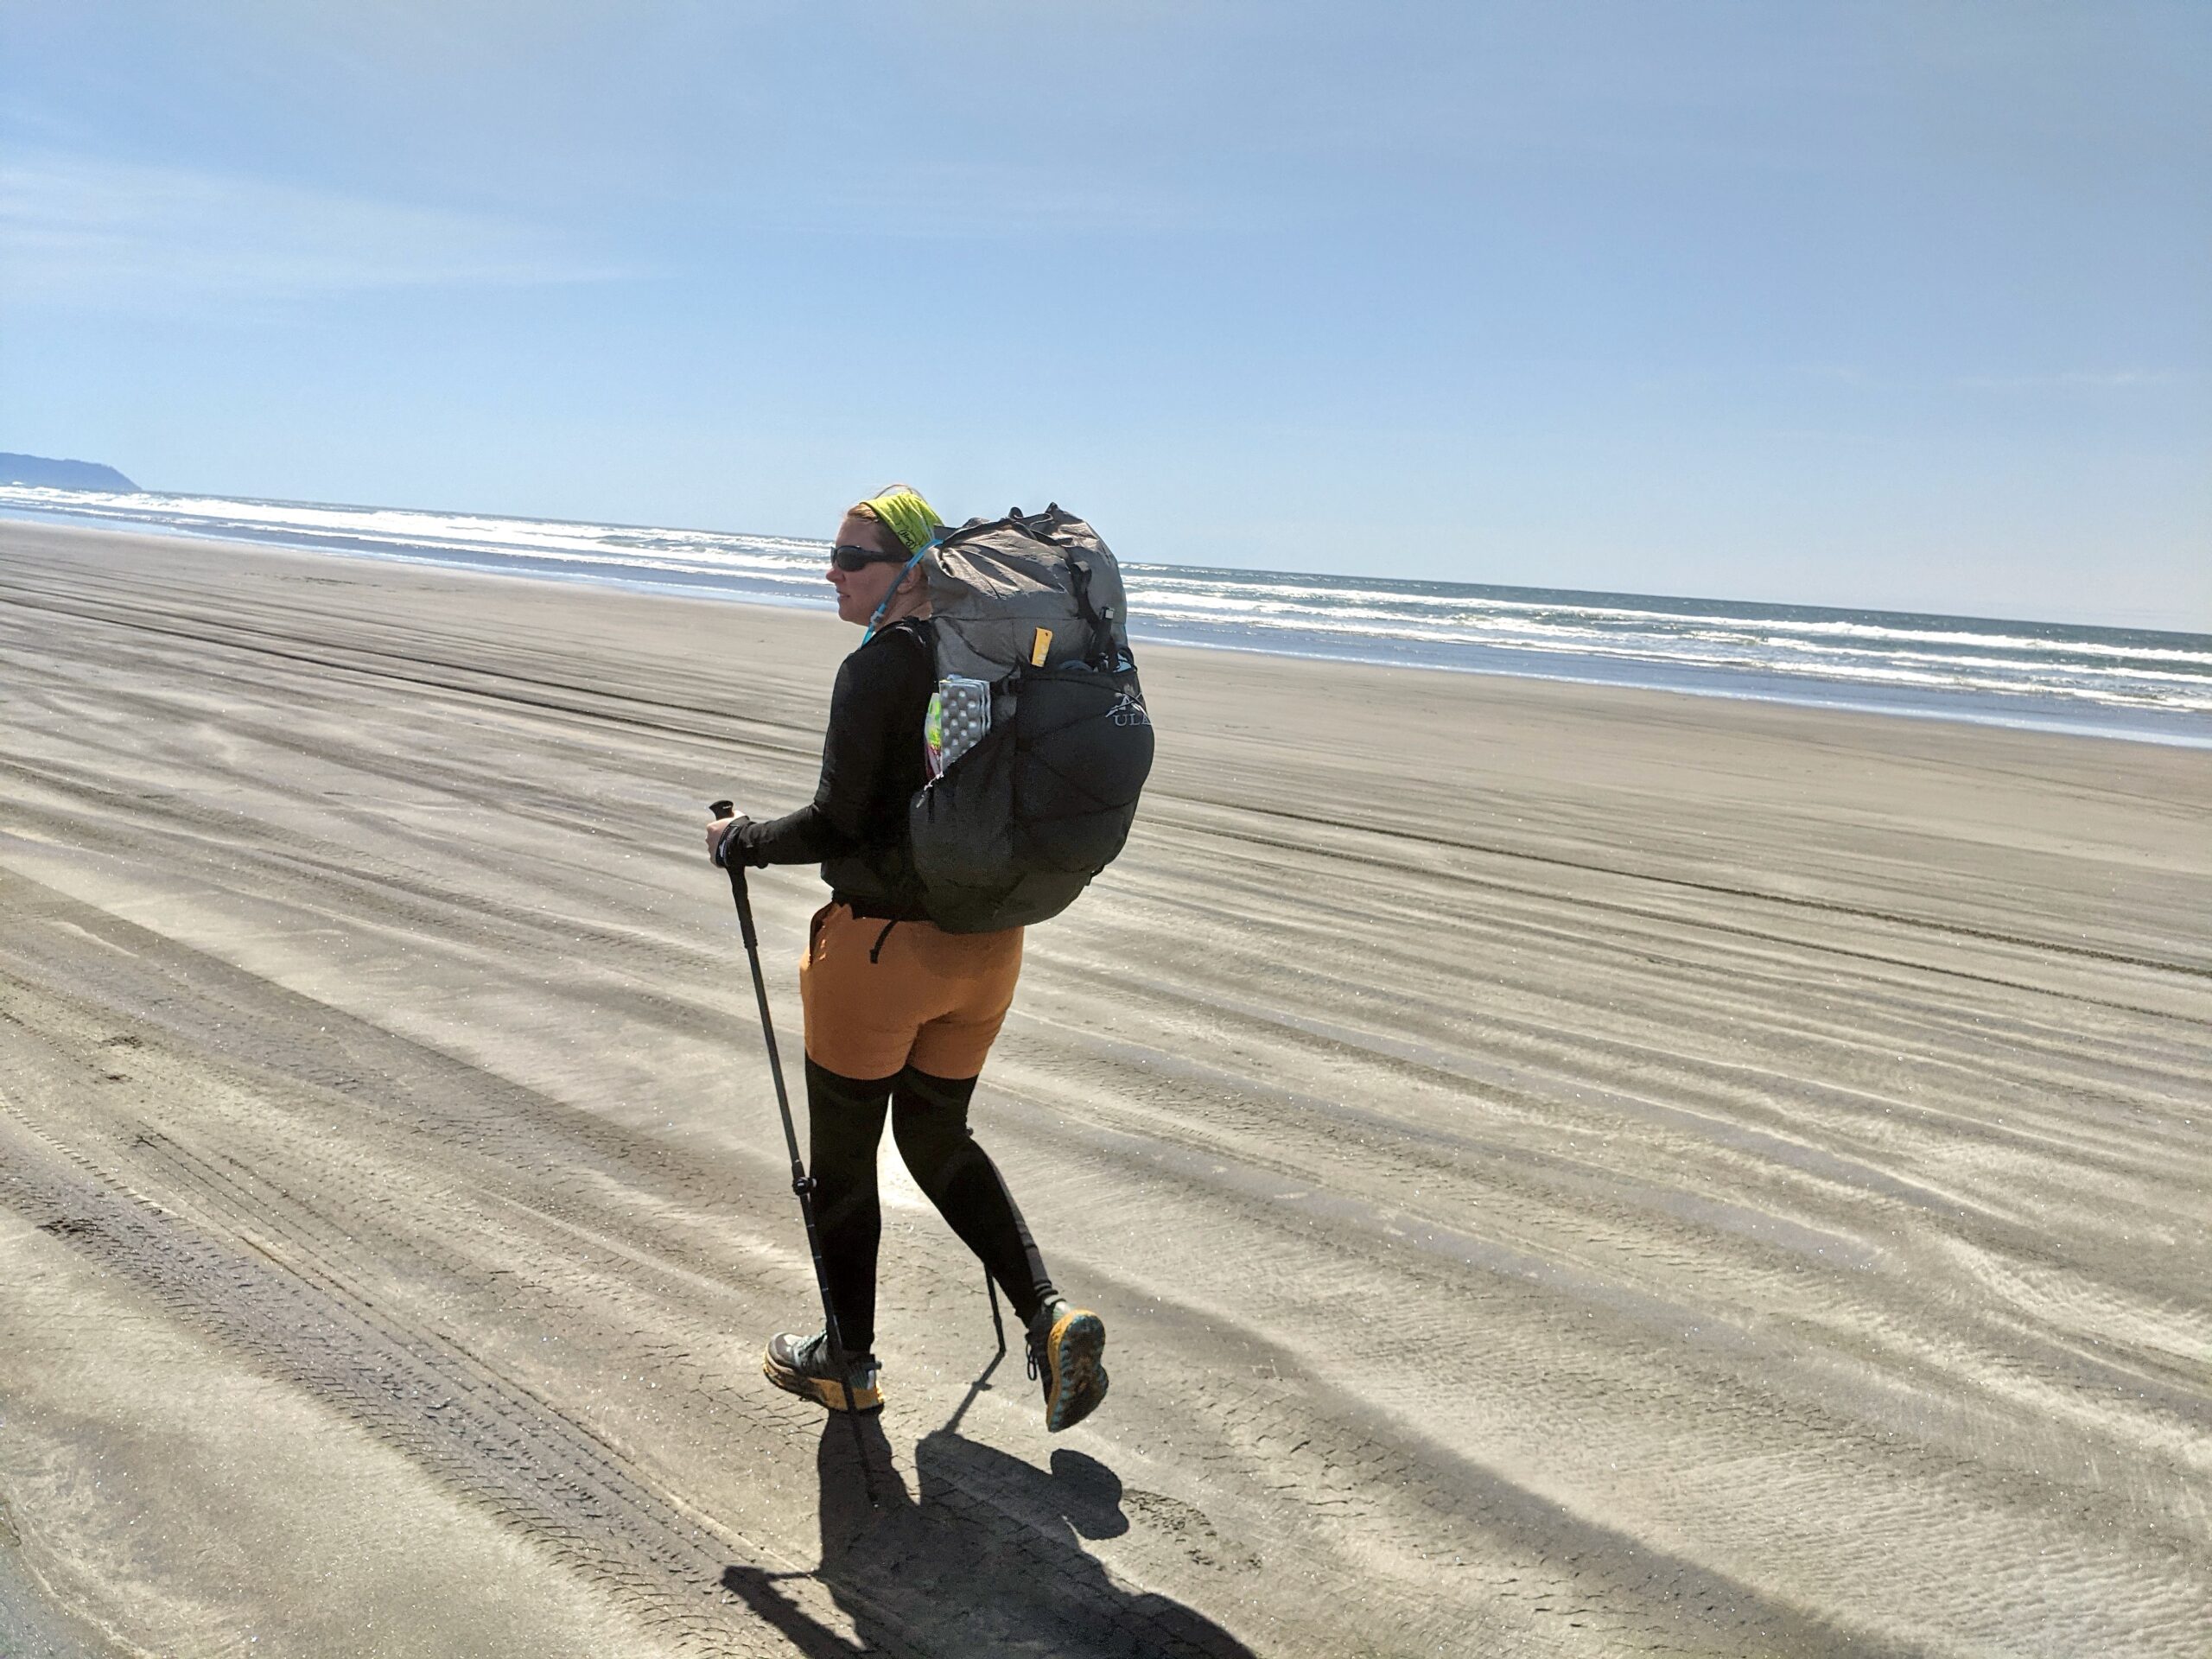 Tester with a fully loaded ultralight backpack